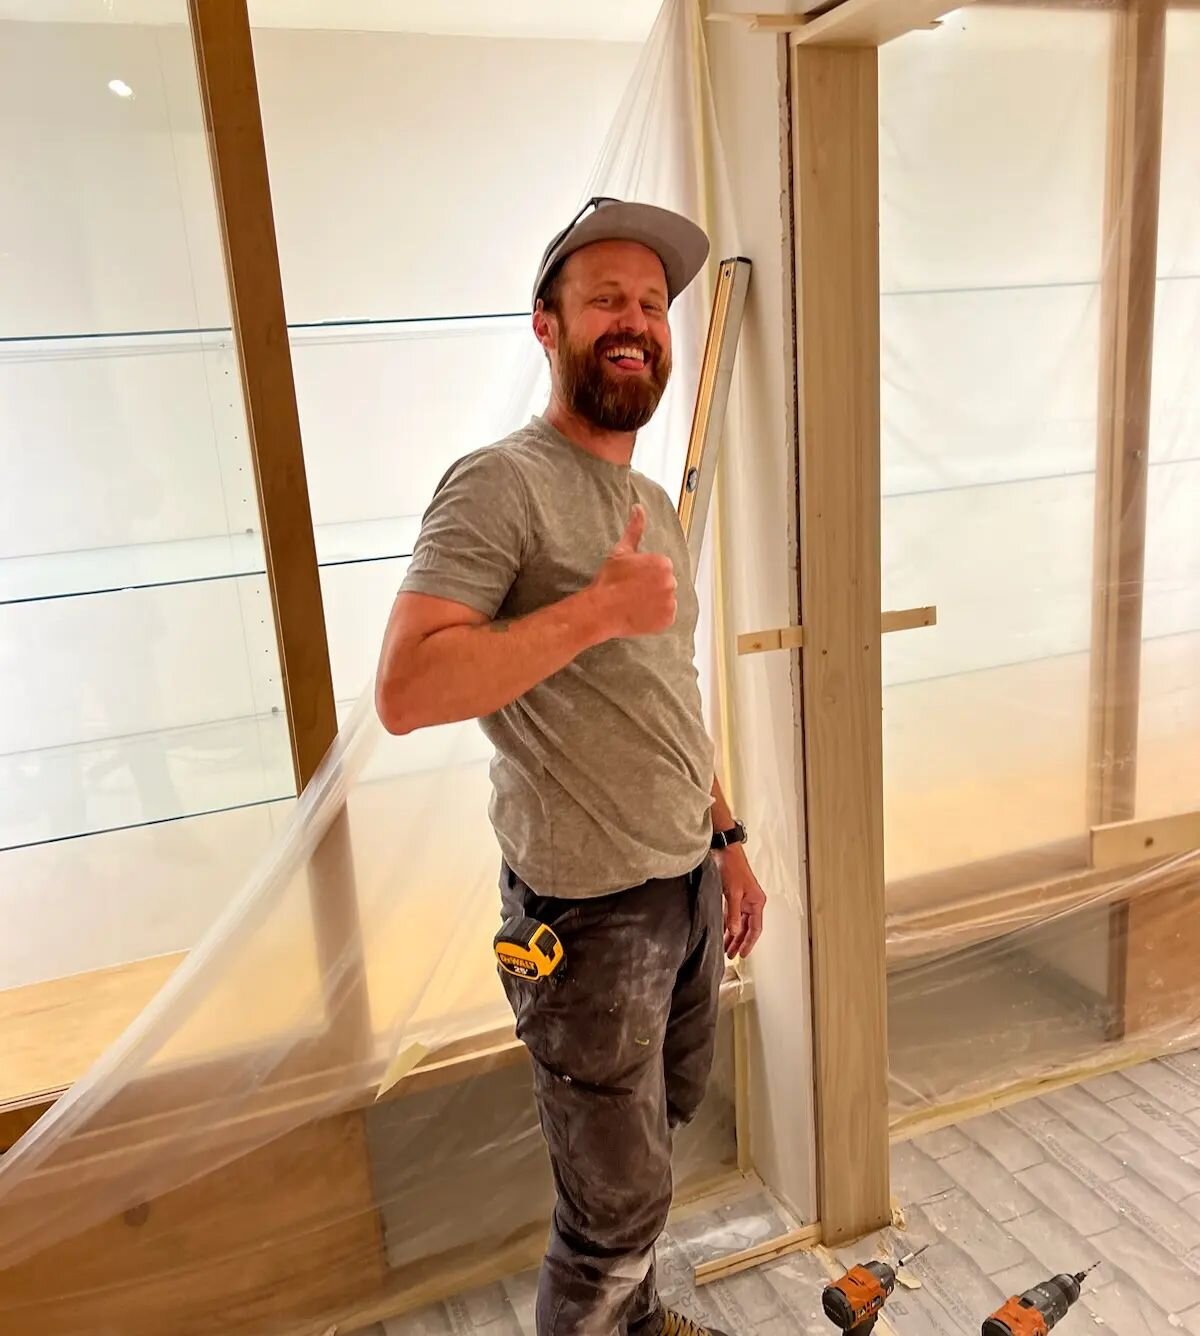 We've got @dannyhartdesignstudio creating something really special for our new space coming soon to downtown Santa Fe. Stay tuned to find out more! 🧡💜🧡💜🧡 #localsupportinglocal